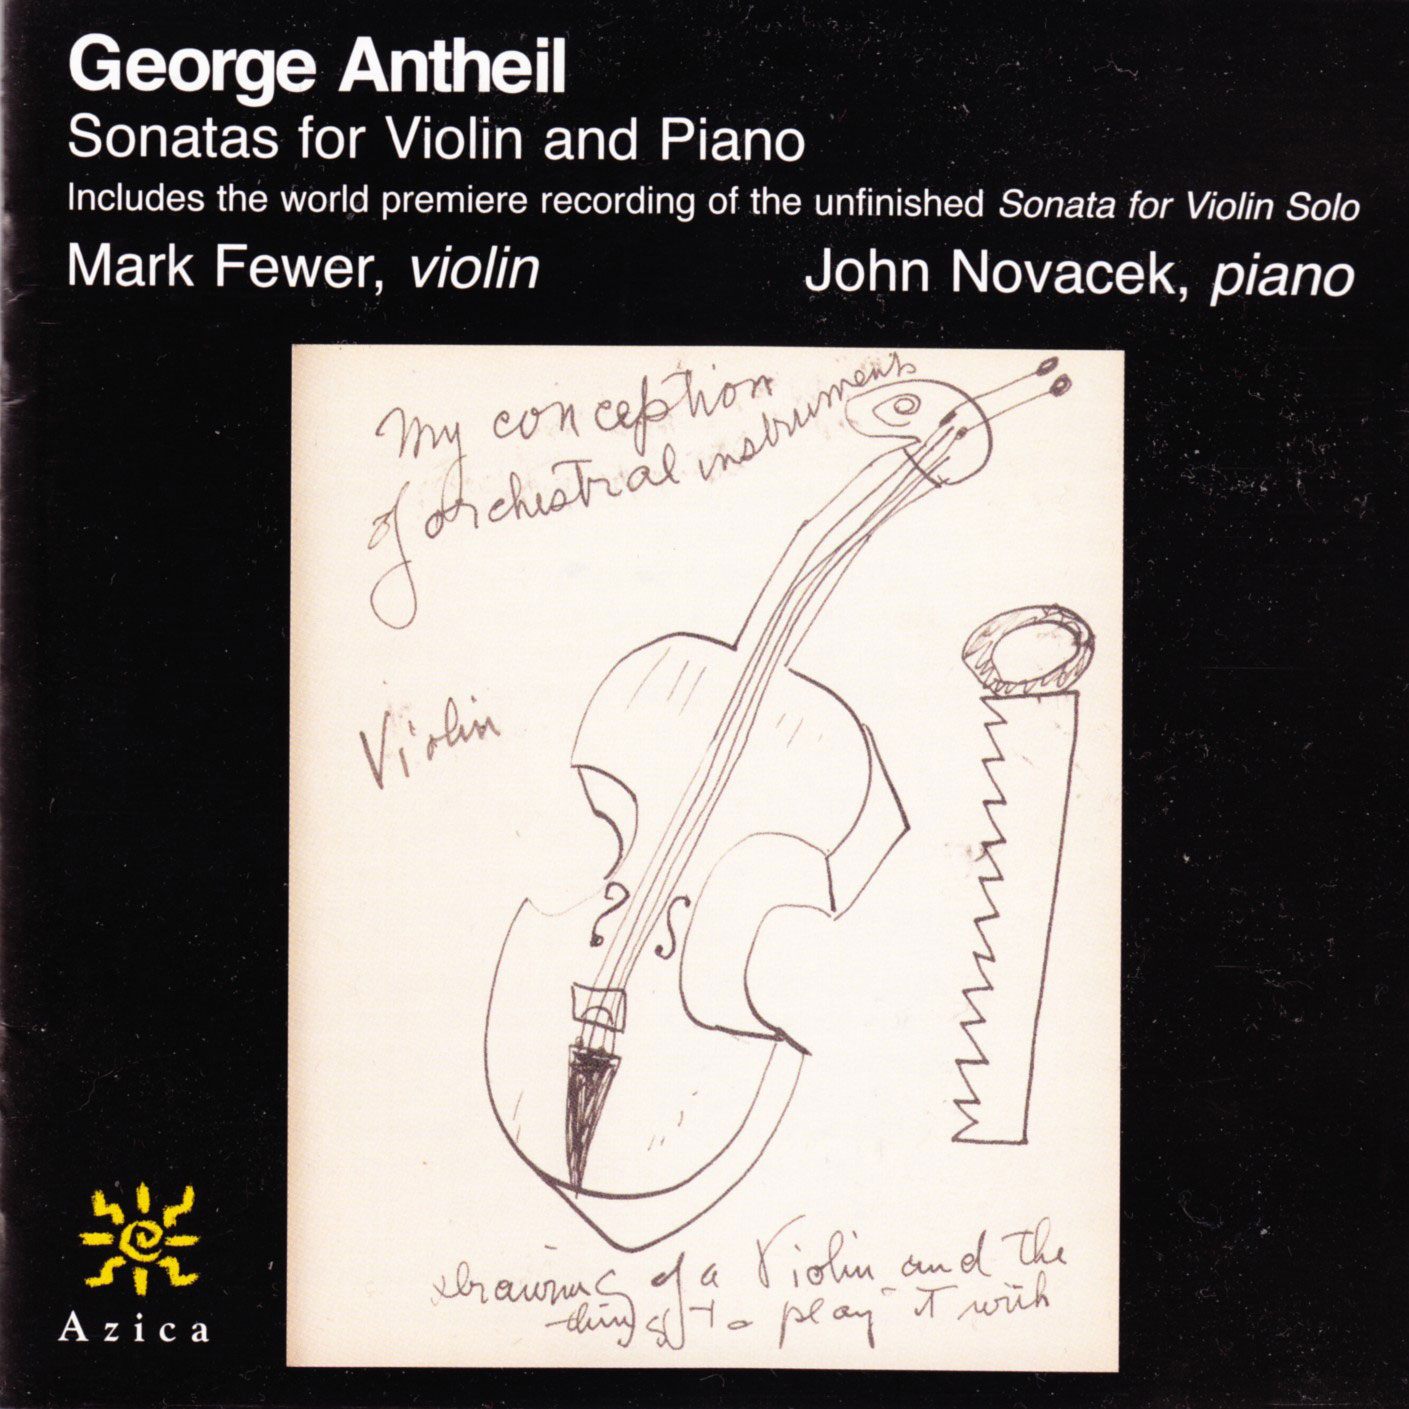 George Antheil: Sonatas for Violin and Piano